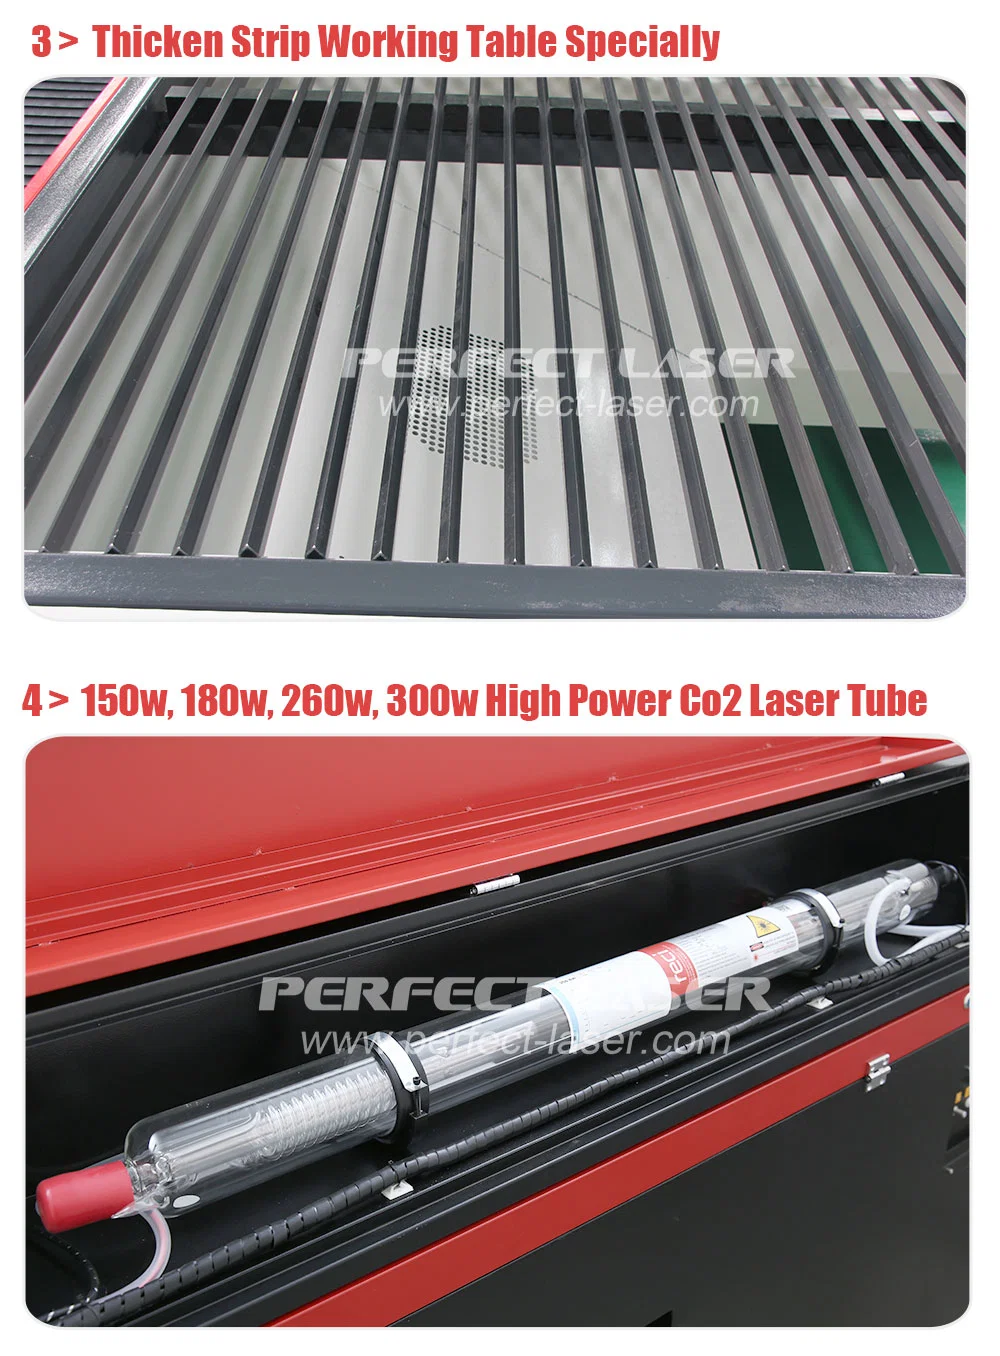 Perfect Laser-180W 260W 300W 400 Watts 1325 1212 1218 CNC Metal Steel &amp; Nonmetal Materials Wood/MDF/Aryclic/PVC Chinese CO2 Mixed Laser Cutting Machine Price